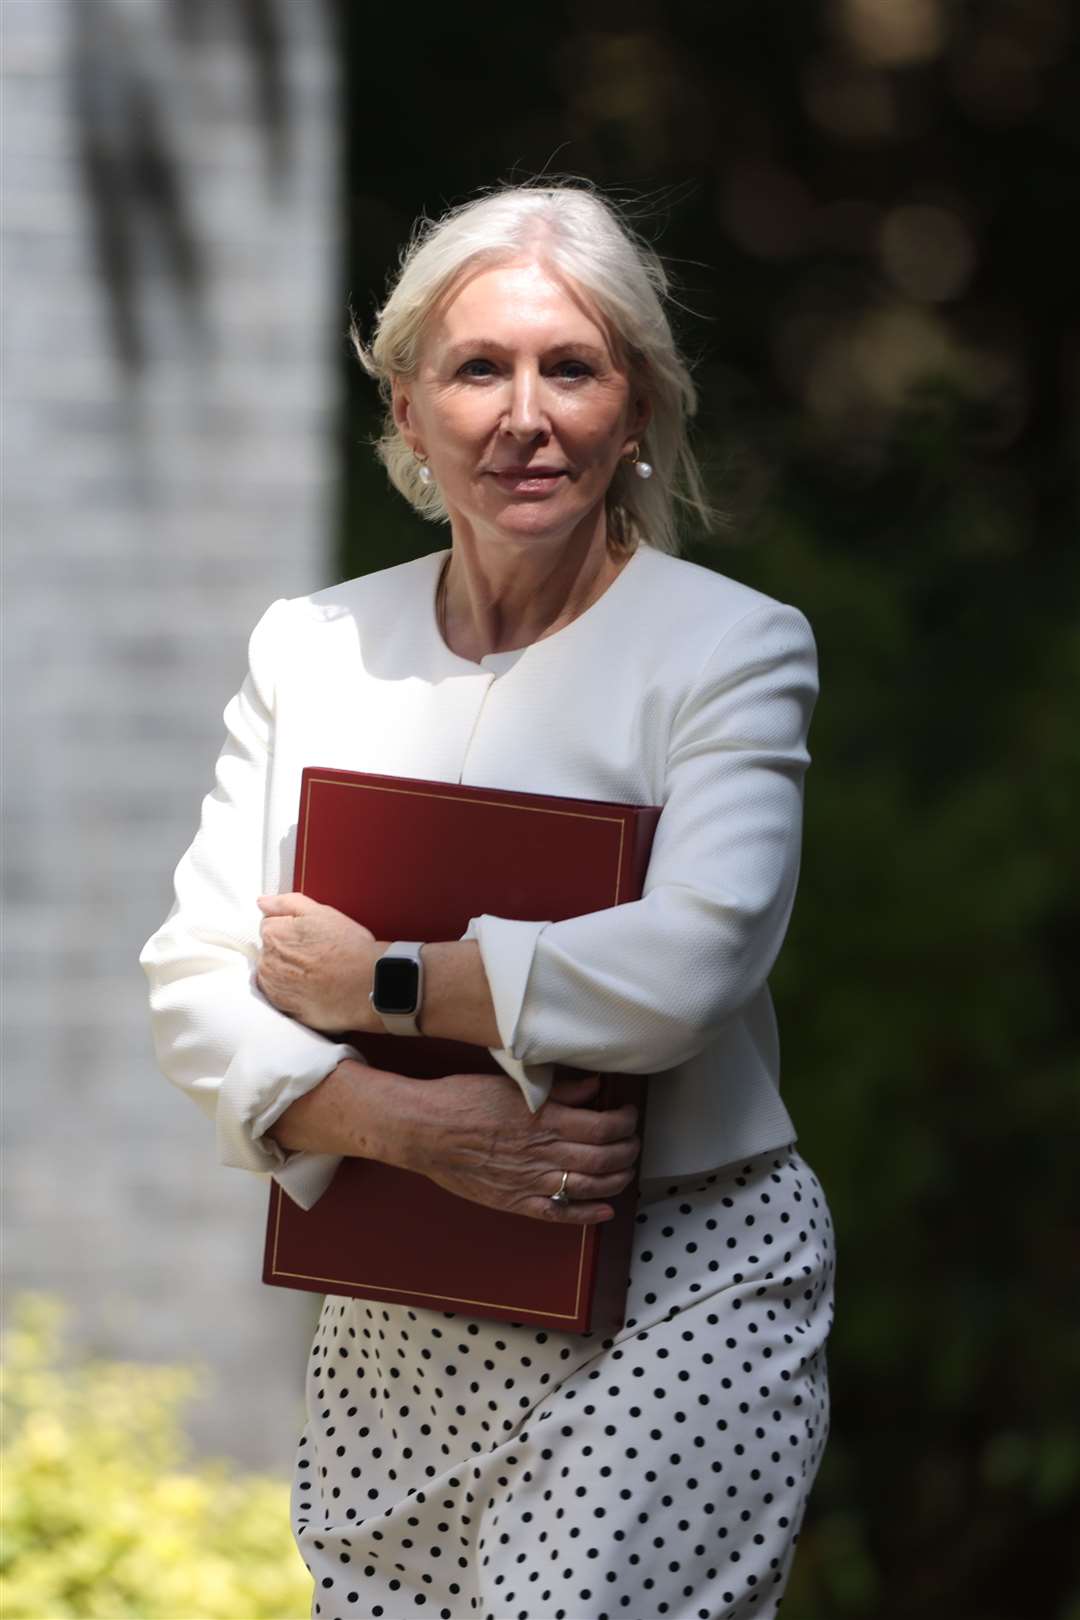 Michelle Donelan’s predecessor Nadine Dorries led the controversial decision to take Channel 4 out of public ownership during her time under Boris Johnson’s leadership. (James Manning/PA)